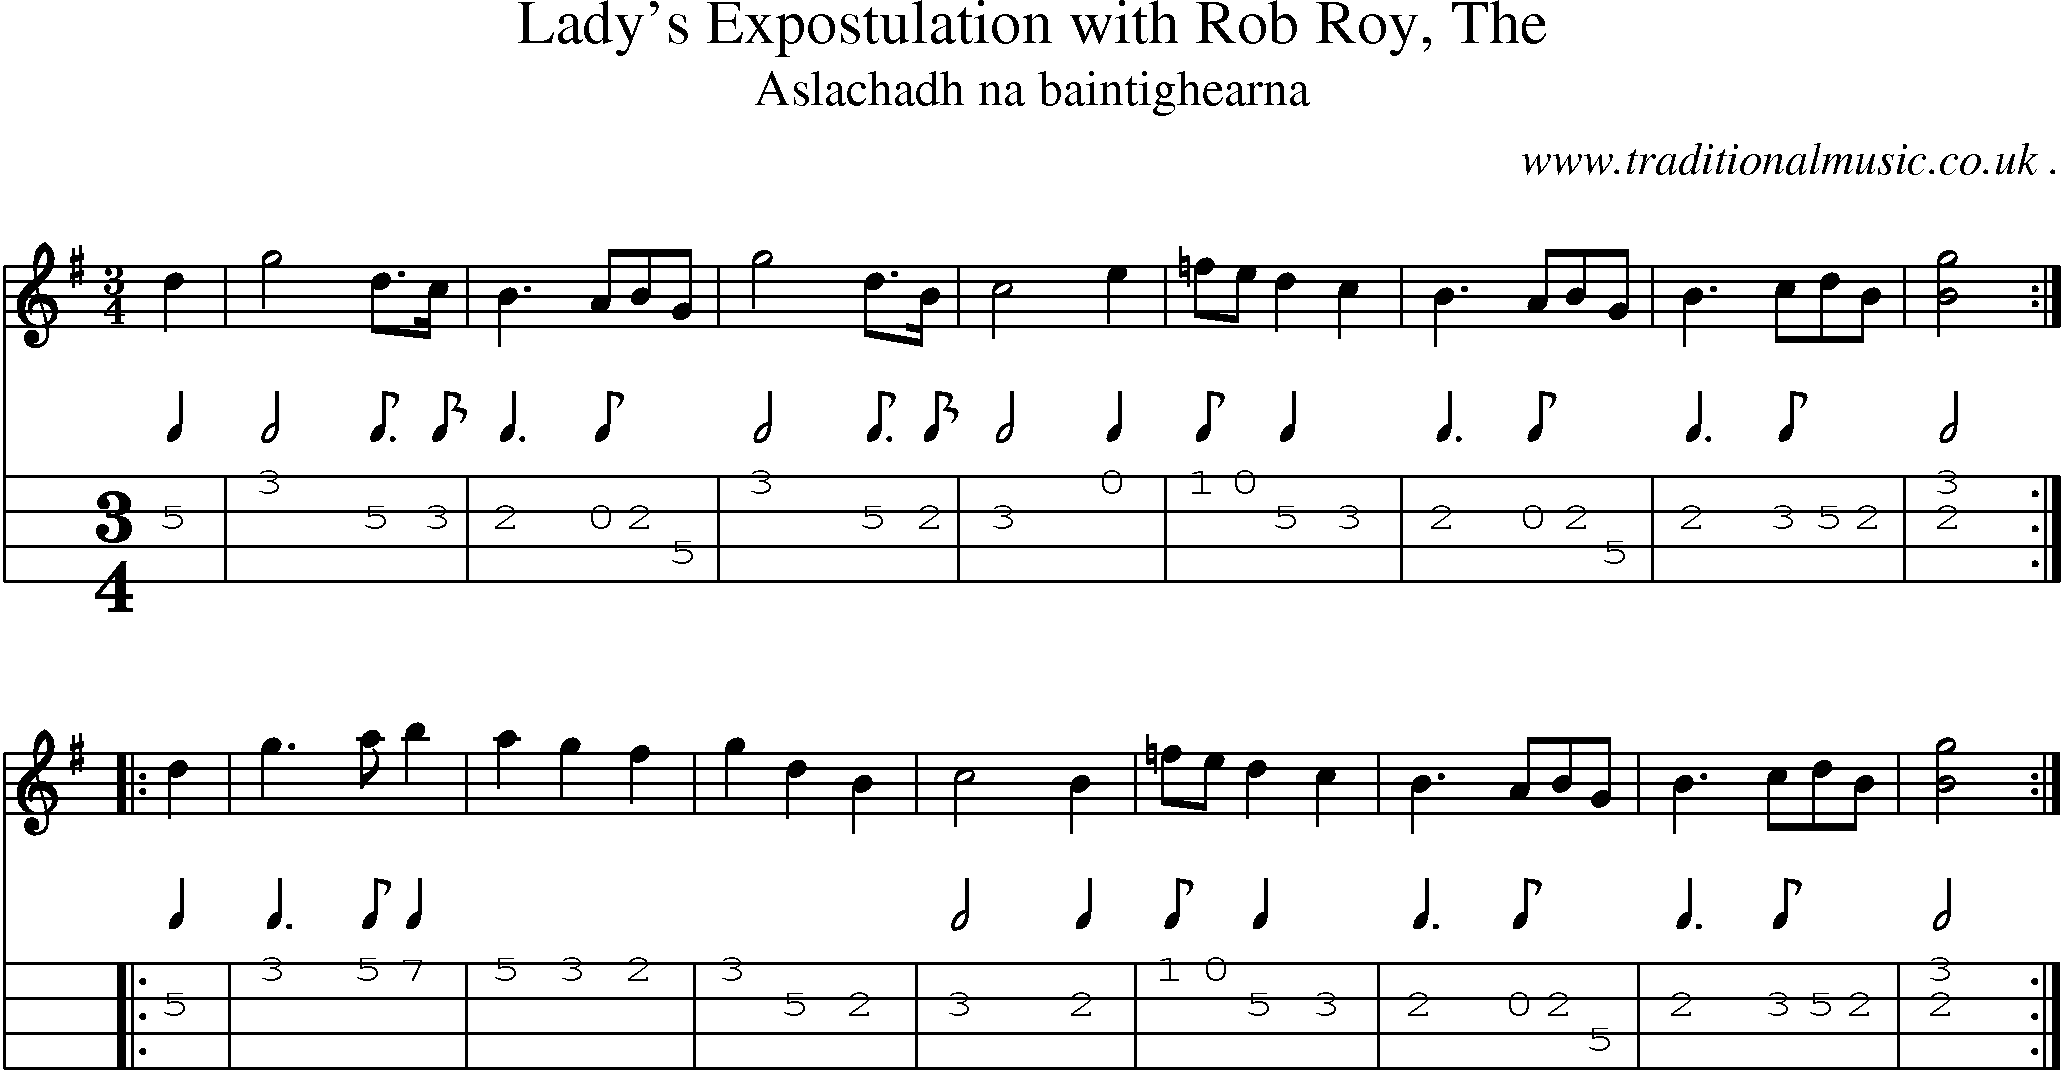 Sheet-music  score, Chords and Mandolin Tabs for Ladys Expostulation With Rob Roy The